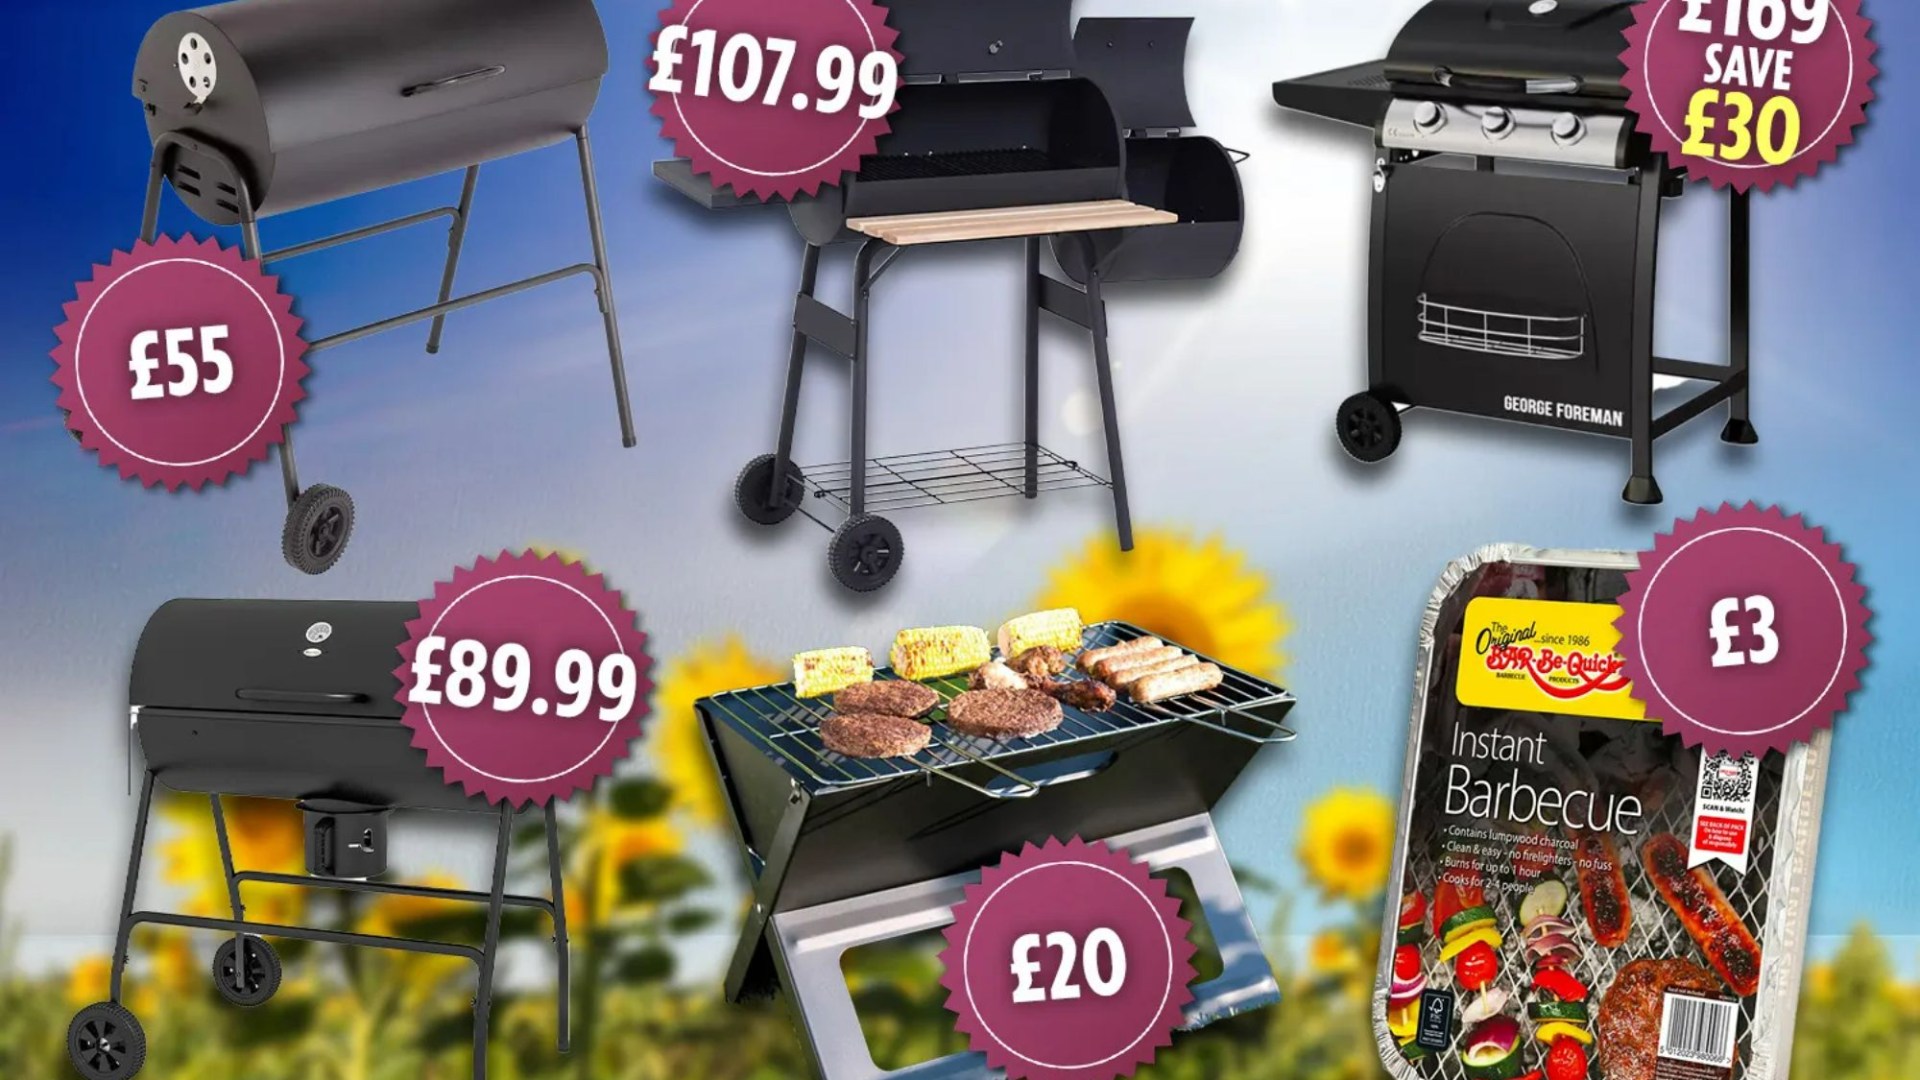 Cheapest place to buy BBQs this weekend from Argos, B&M and The Range with prices starting from 3 [Video]